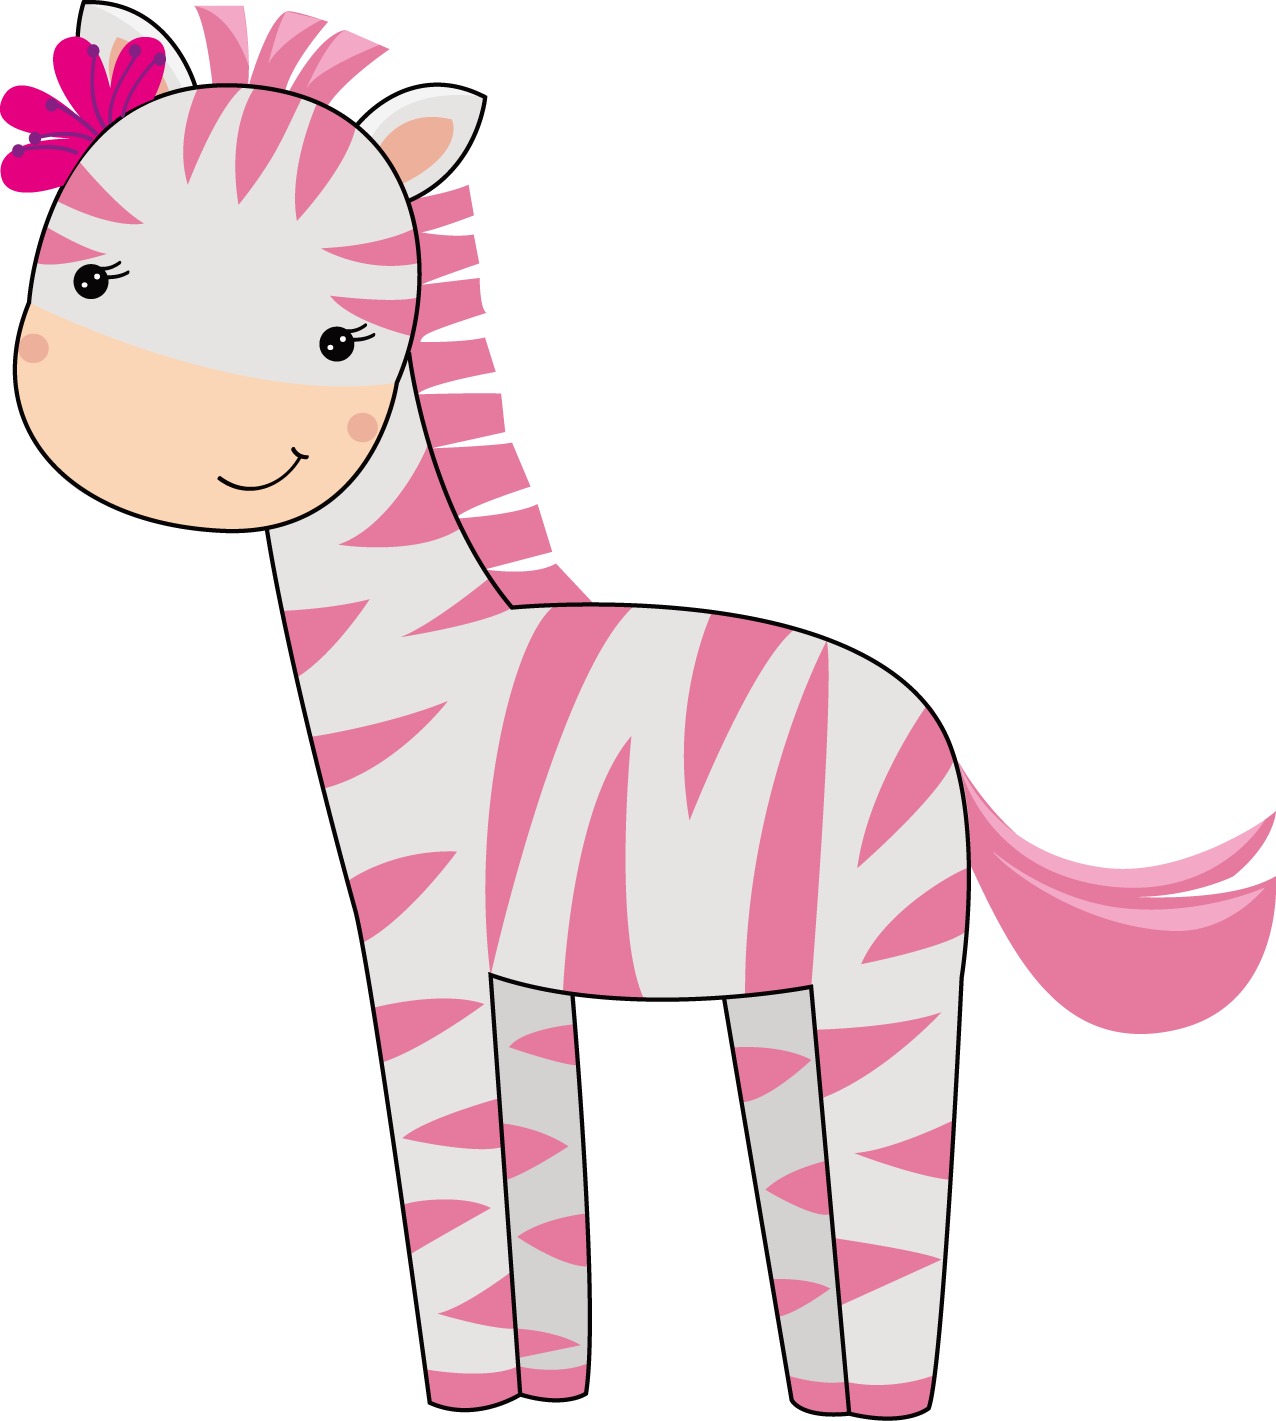 Pictures of pink animals clipart images gallery for free